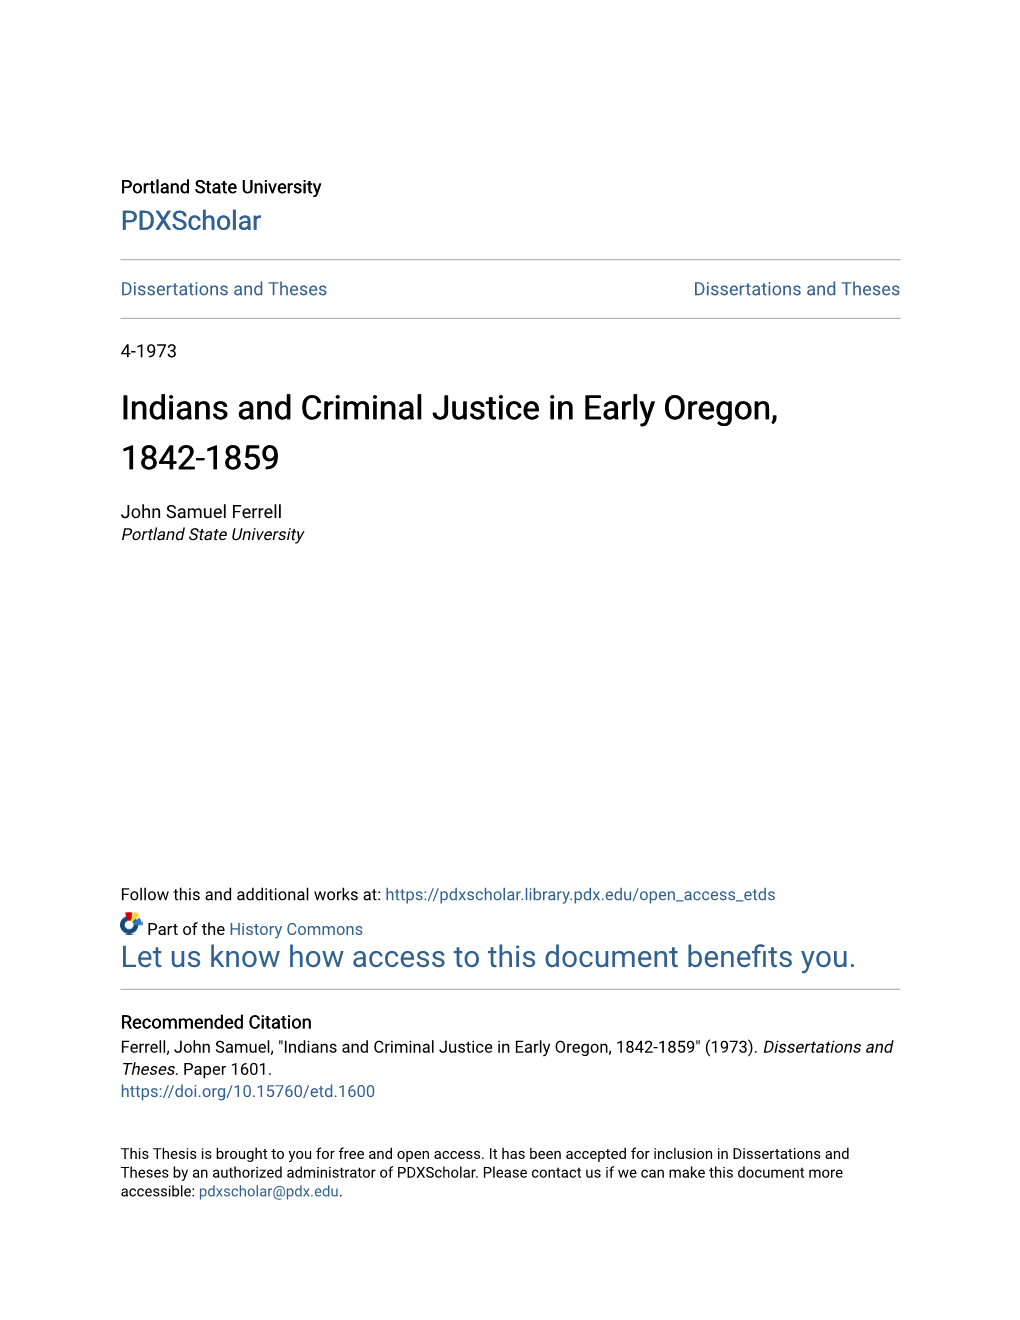 Indians and Criminal Justice in Early Oregon, 1842-1859